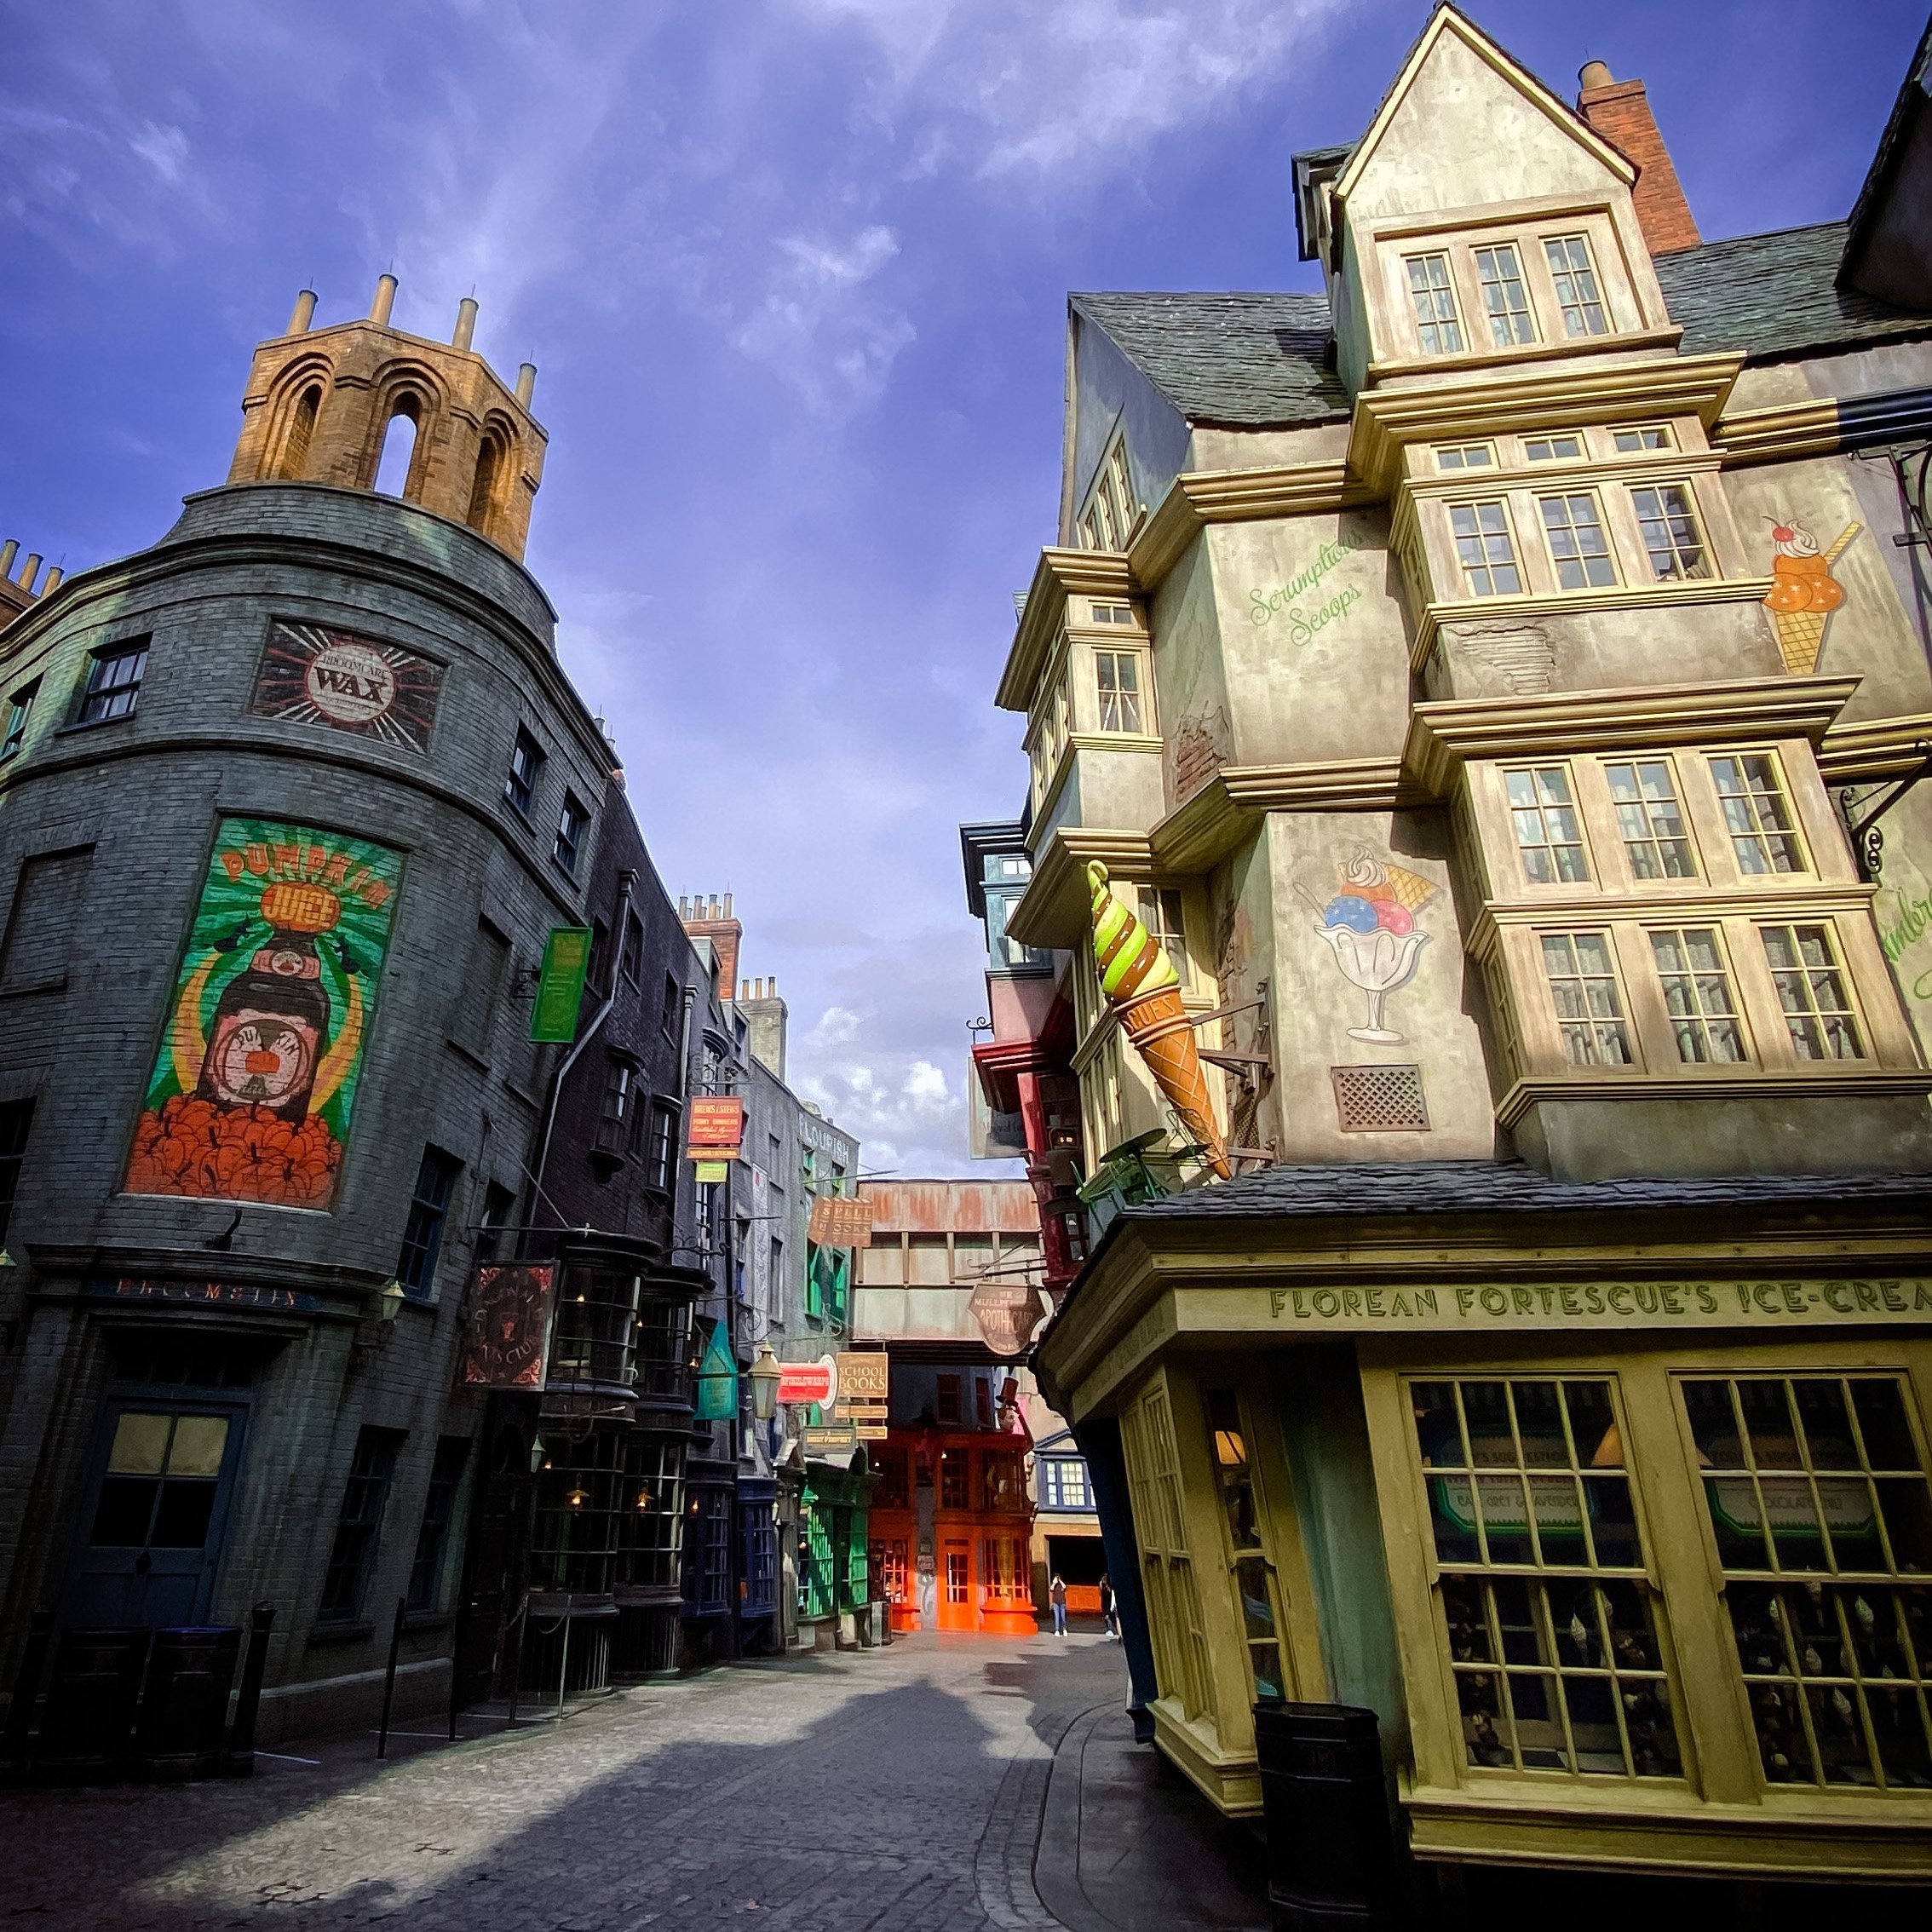 How to Spend Your Evening When the Universal Orlando Parks Close Early